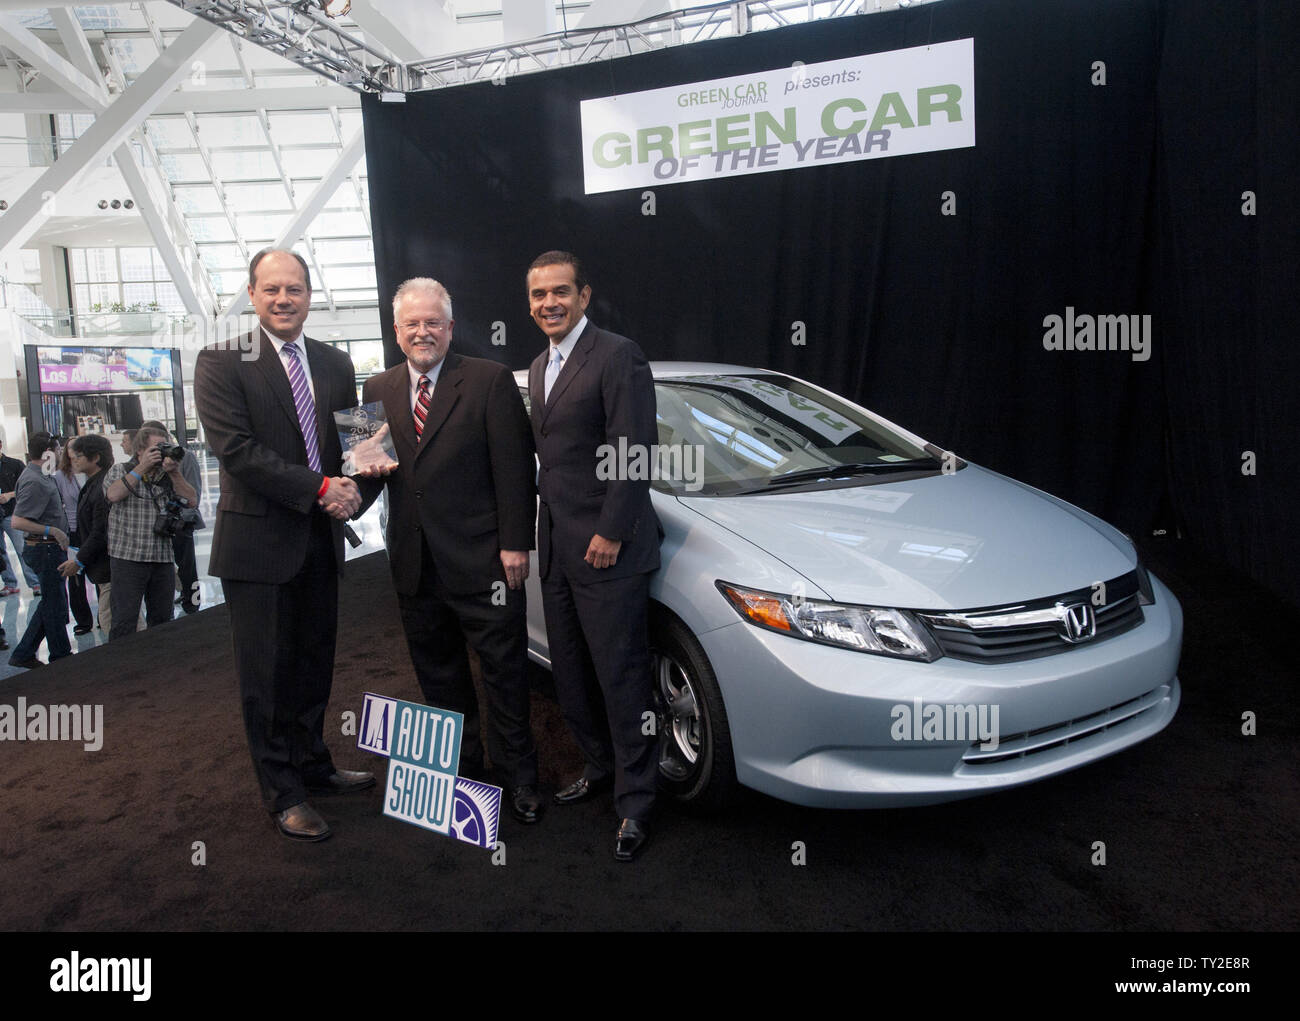 Michael Accavitti (L-R), vice president of marketing for American Honda, Green Car Journal editor and publisher Ron Cogan and Los Angeles Mayor Antonio Villaraigosa pose with the Honda Civic natural gas vehicle which was named Green Car of theYear for 2012 at the Los Angeles Auto Show held at the convention center in Los Angeles on November 17, 2011.      UPI/Phil McCarten Stock Photo